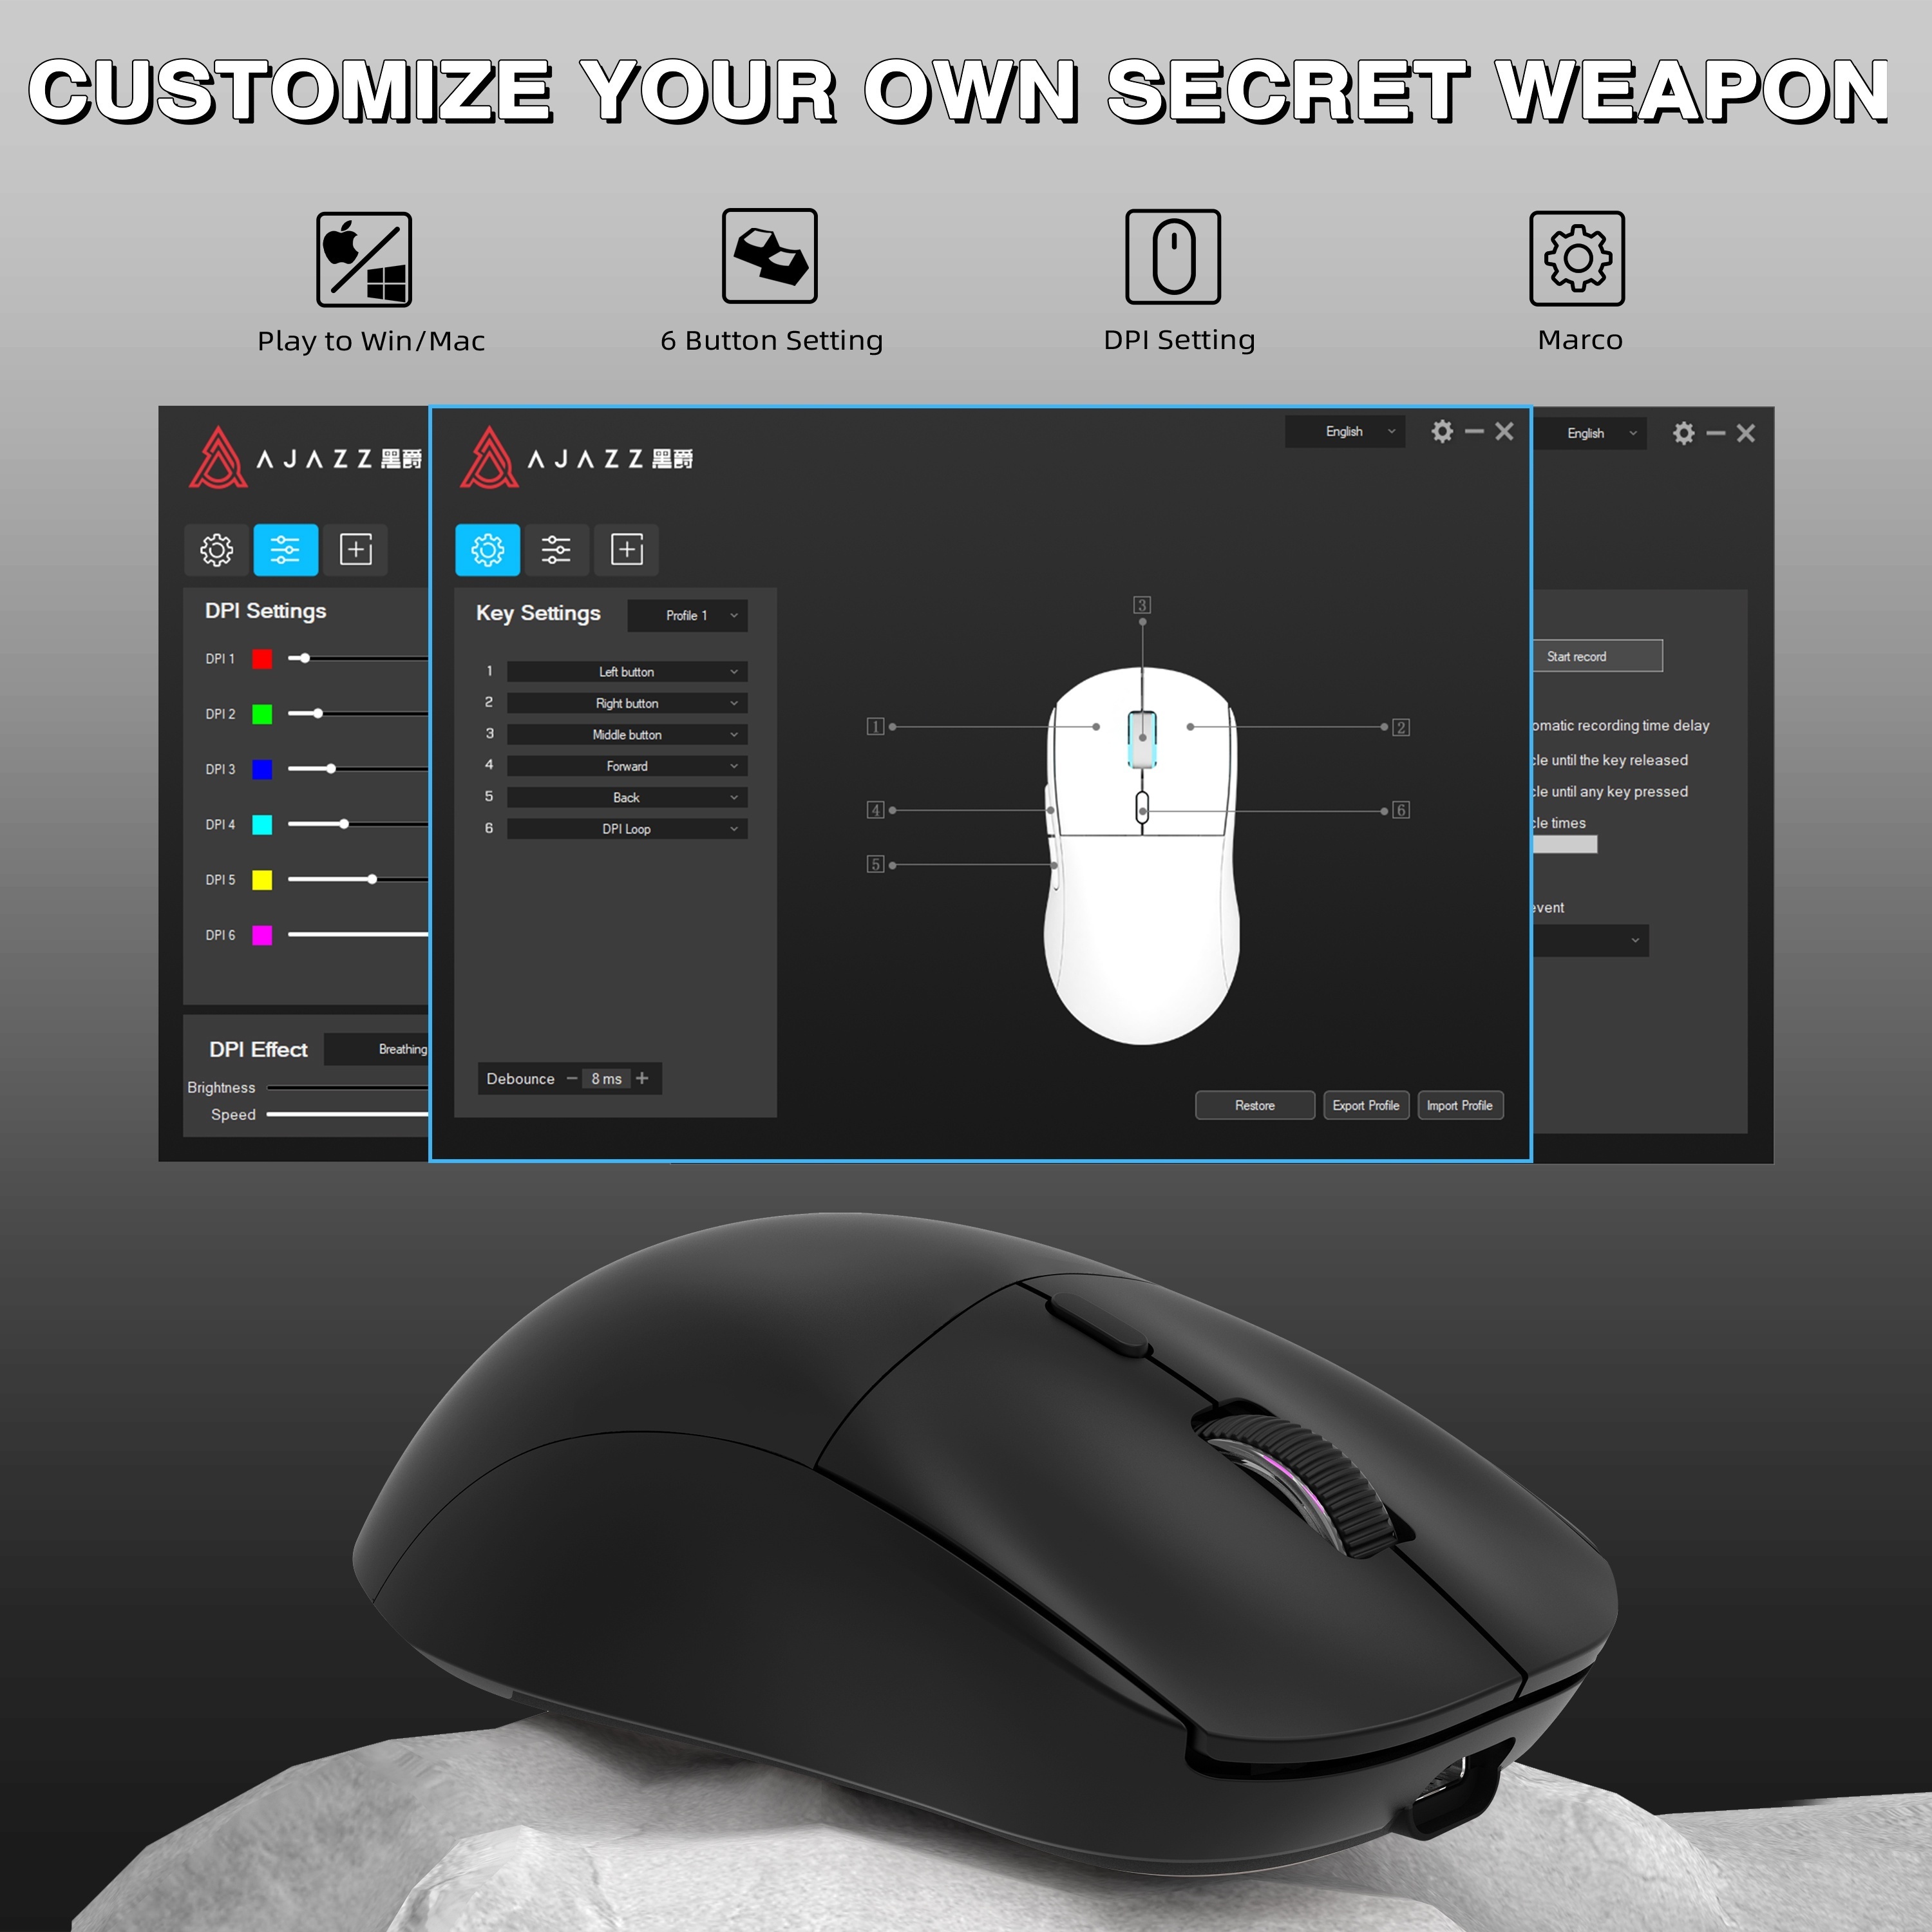 ATTACK SHARK X3 49g SUPERLIGHT Mouse, PixArt PAW3395 Gaming Sensor, BT/2.4G  Wireless/Wired Gaming Mouse, 6 Adjustable DPI up to 26000, 200 Hrs Battery,  G502, Office Mice for Win11/Xbox/PS/Mac (Black): : Computers 